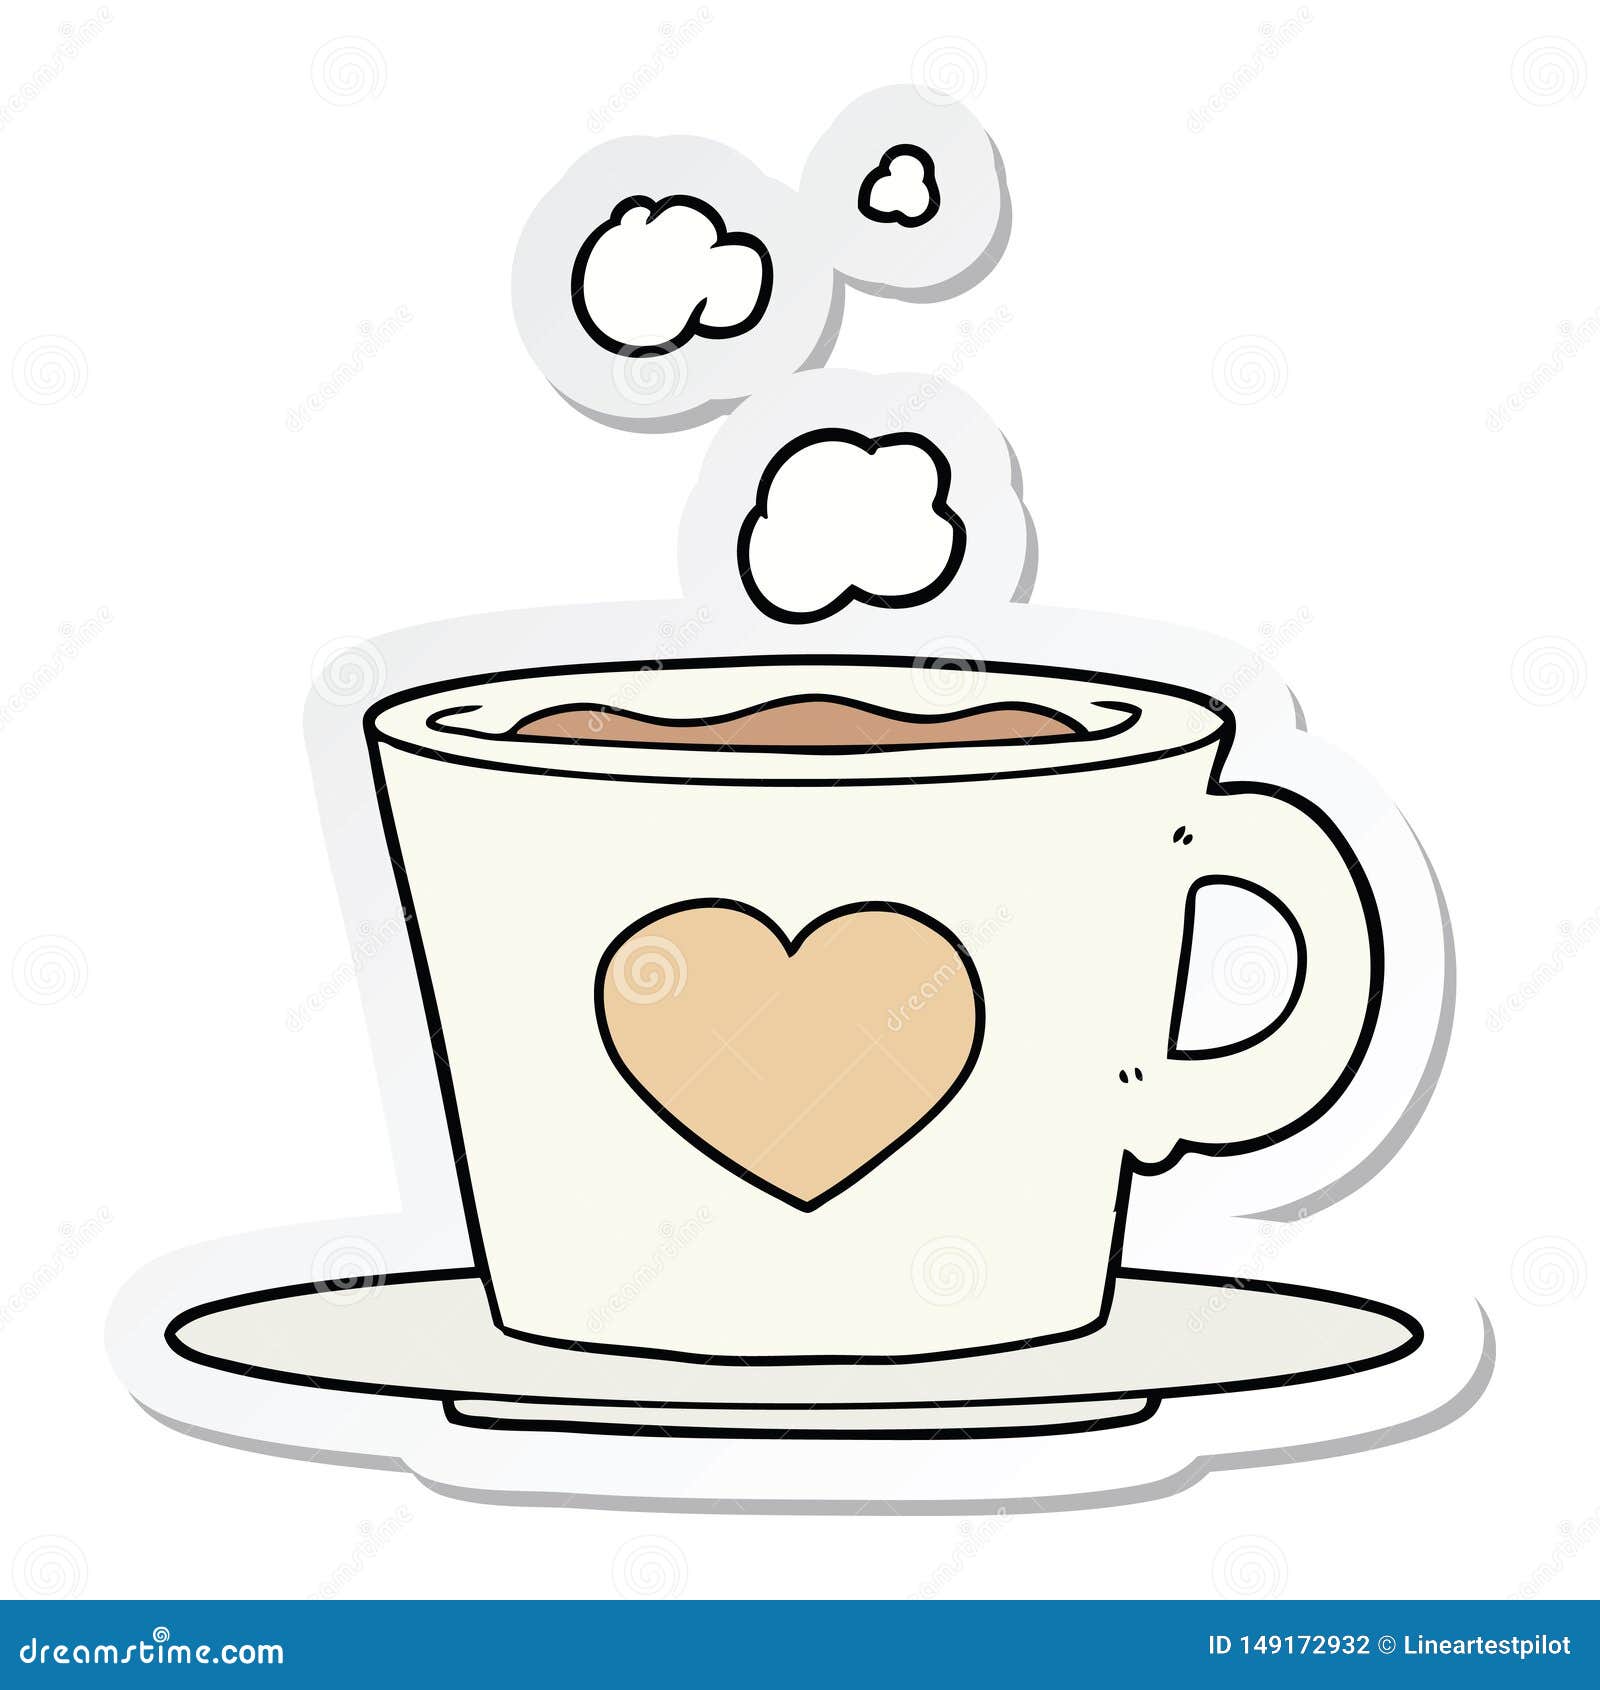 https://thumbs.dreamstime.com/z/sticker-lovely-cup-coffee-creative-illustrated-149172932.jpg